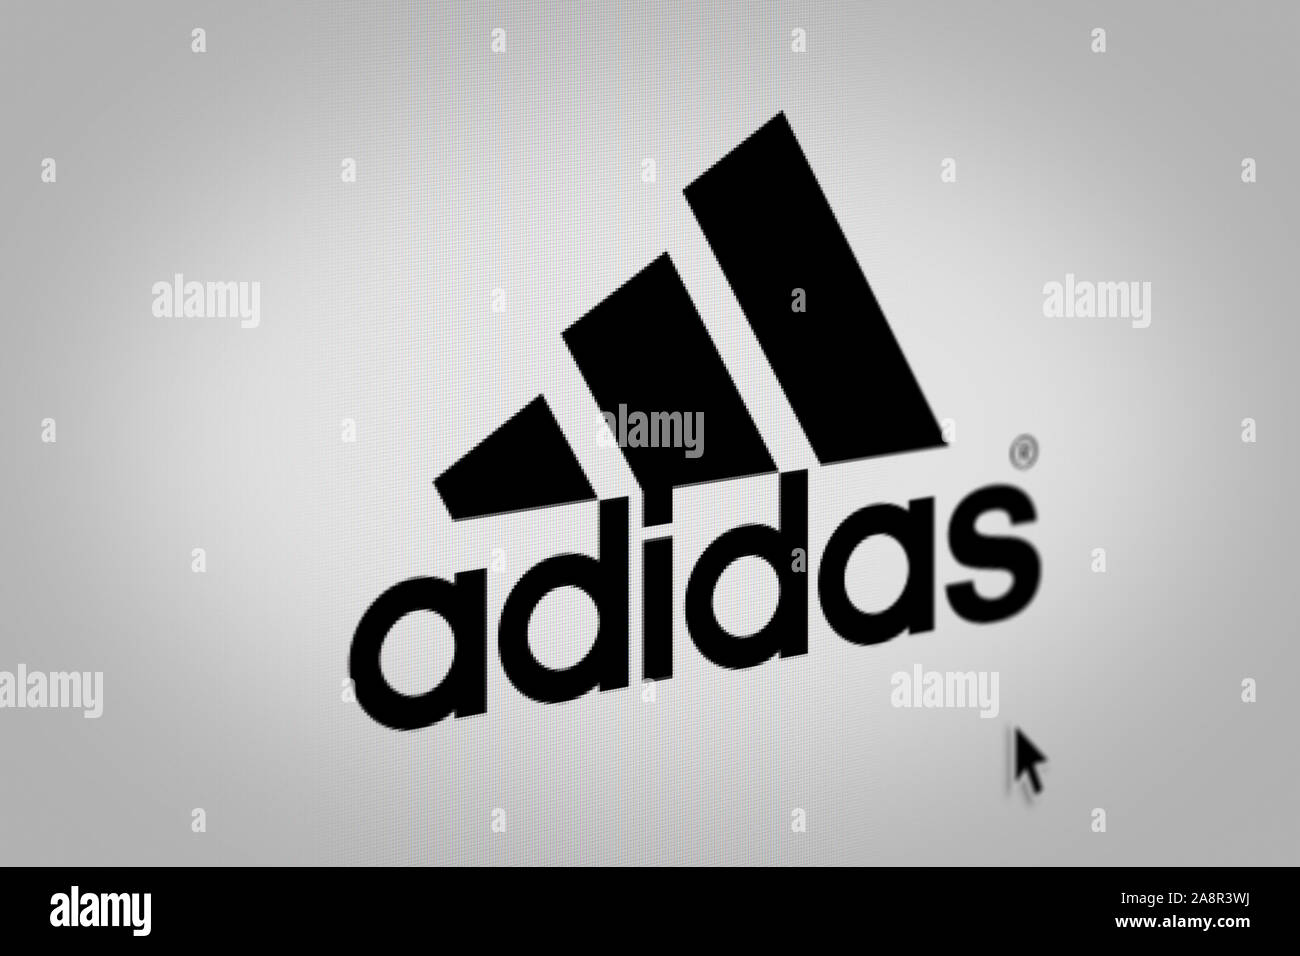 Logo of the public company Adidas displayed on a computer screen in  close-up. Credit: PIXDUCE Stock Photo - Alamy